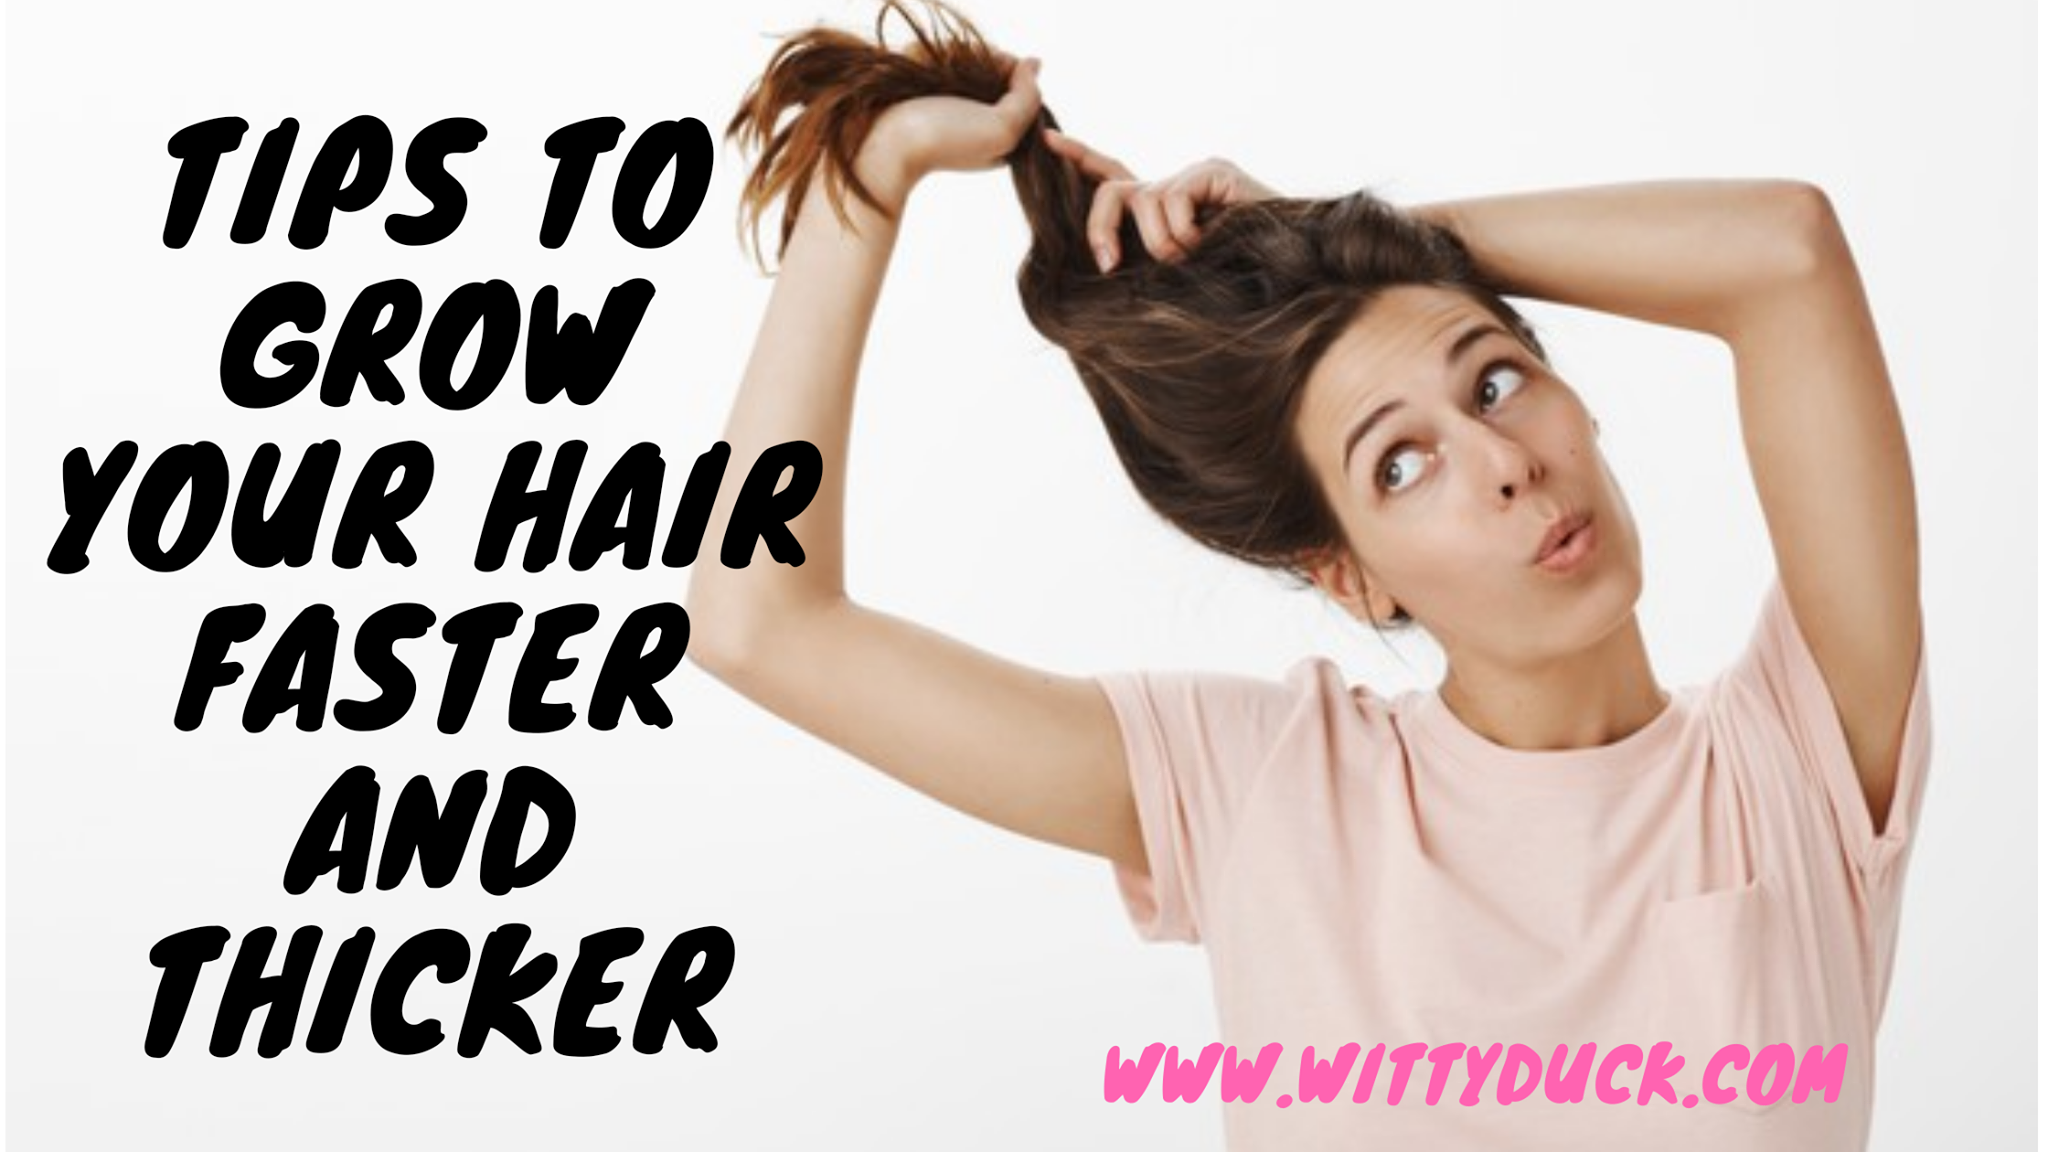 13 Tips How to Grow Your Hair Faster and Thicker - Wittyduck